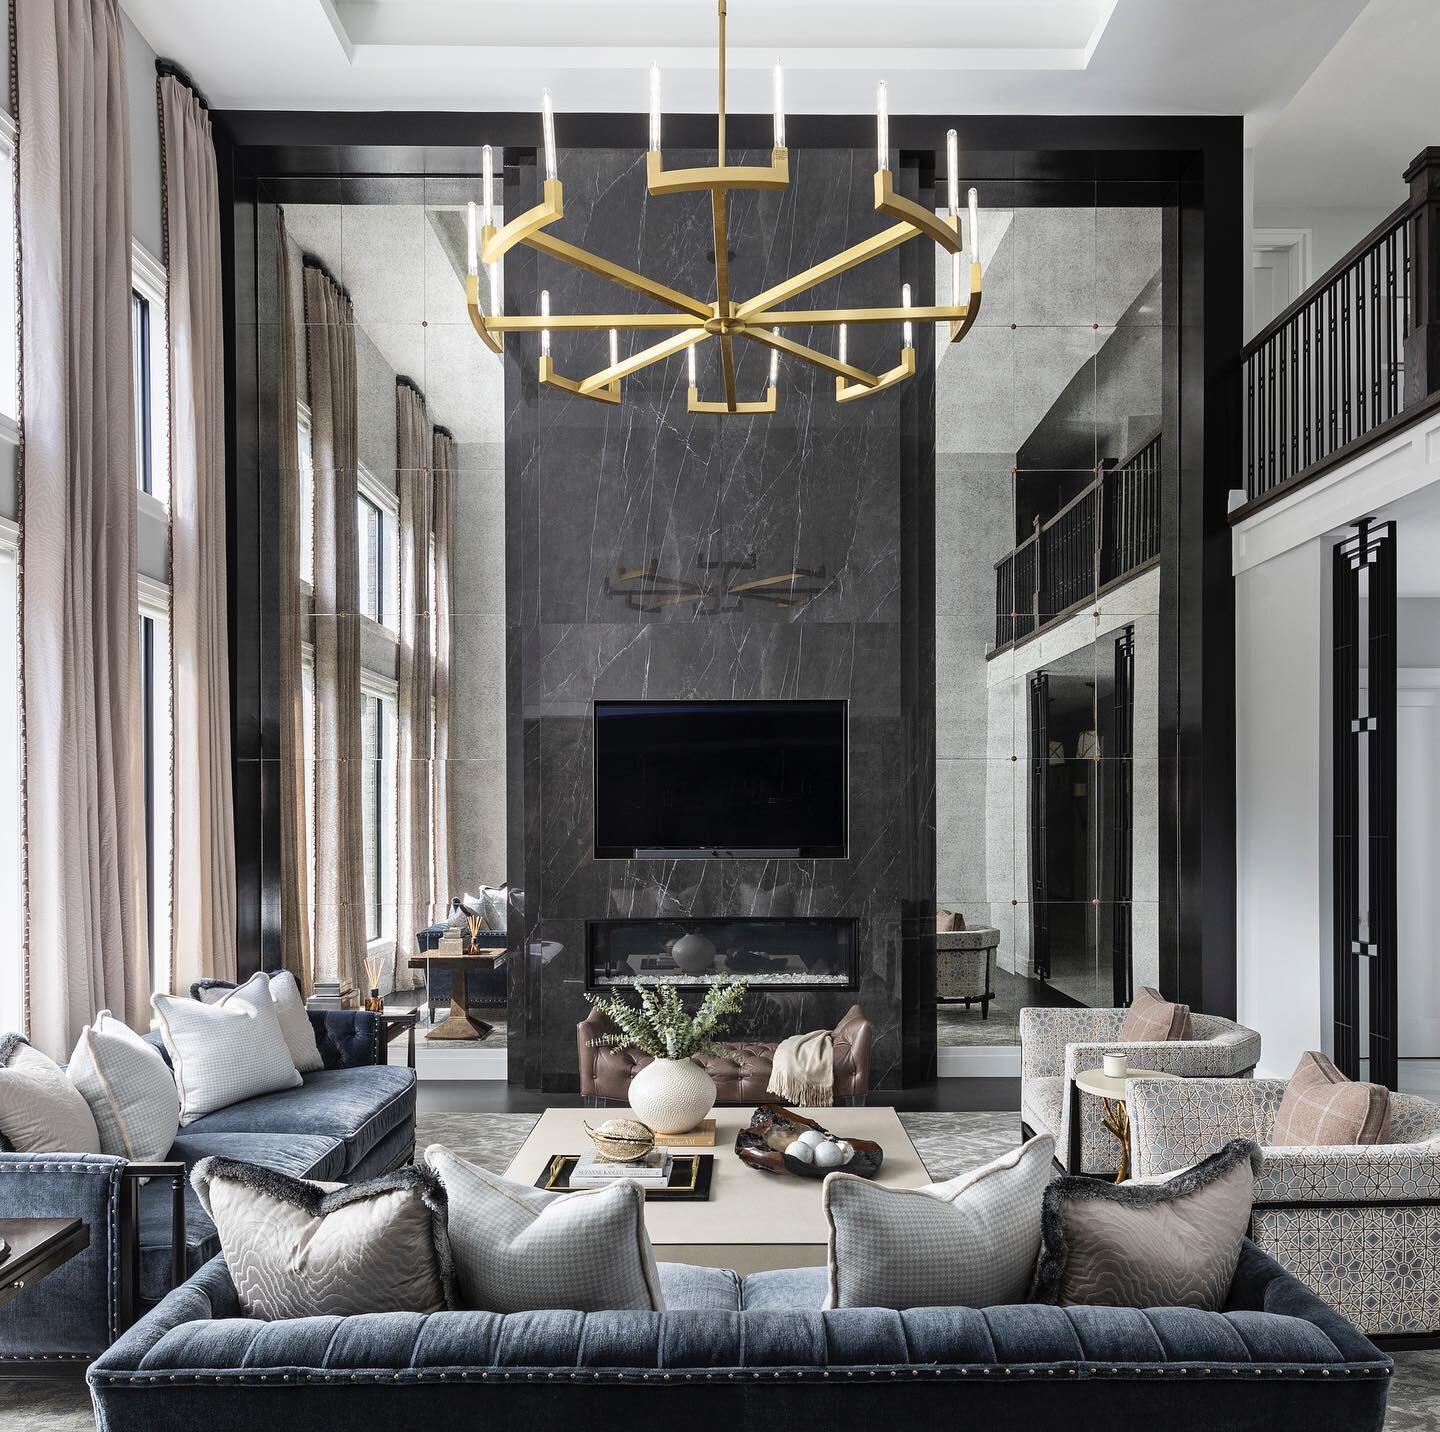 Dramatic interiors and textures that come together to make a beautiful space. 
Design: @meriendakadesigngroup 

&bull;
&bull;
&bull;

#interiordesign #interiordesigner #interiors #design #architecture #luxuryhomes #luxdesign #luxe #customhomes #firep